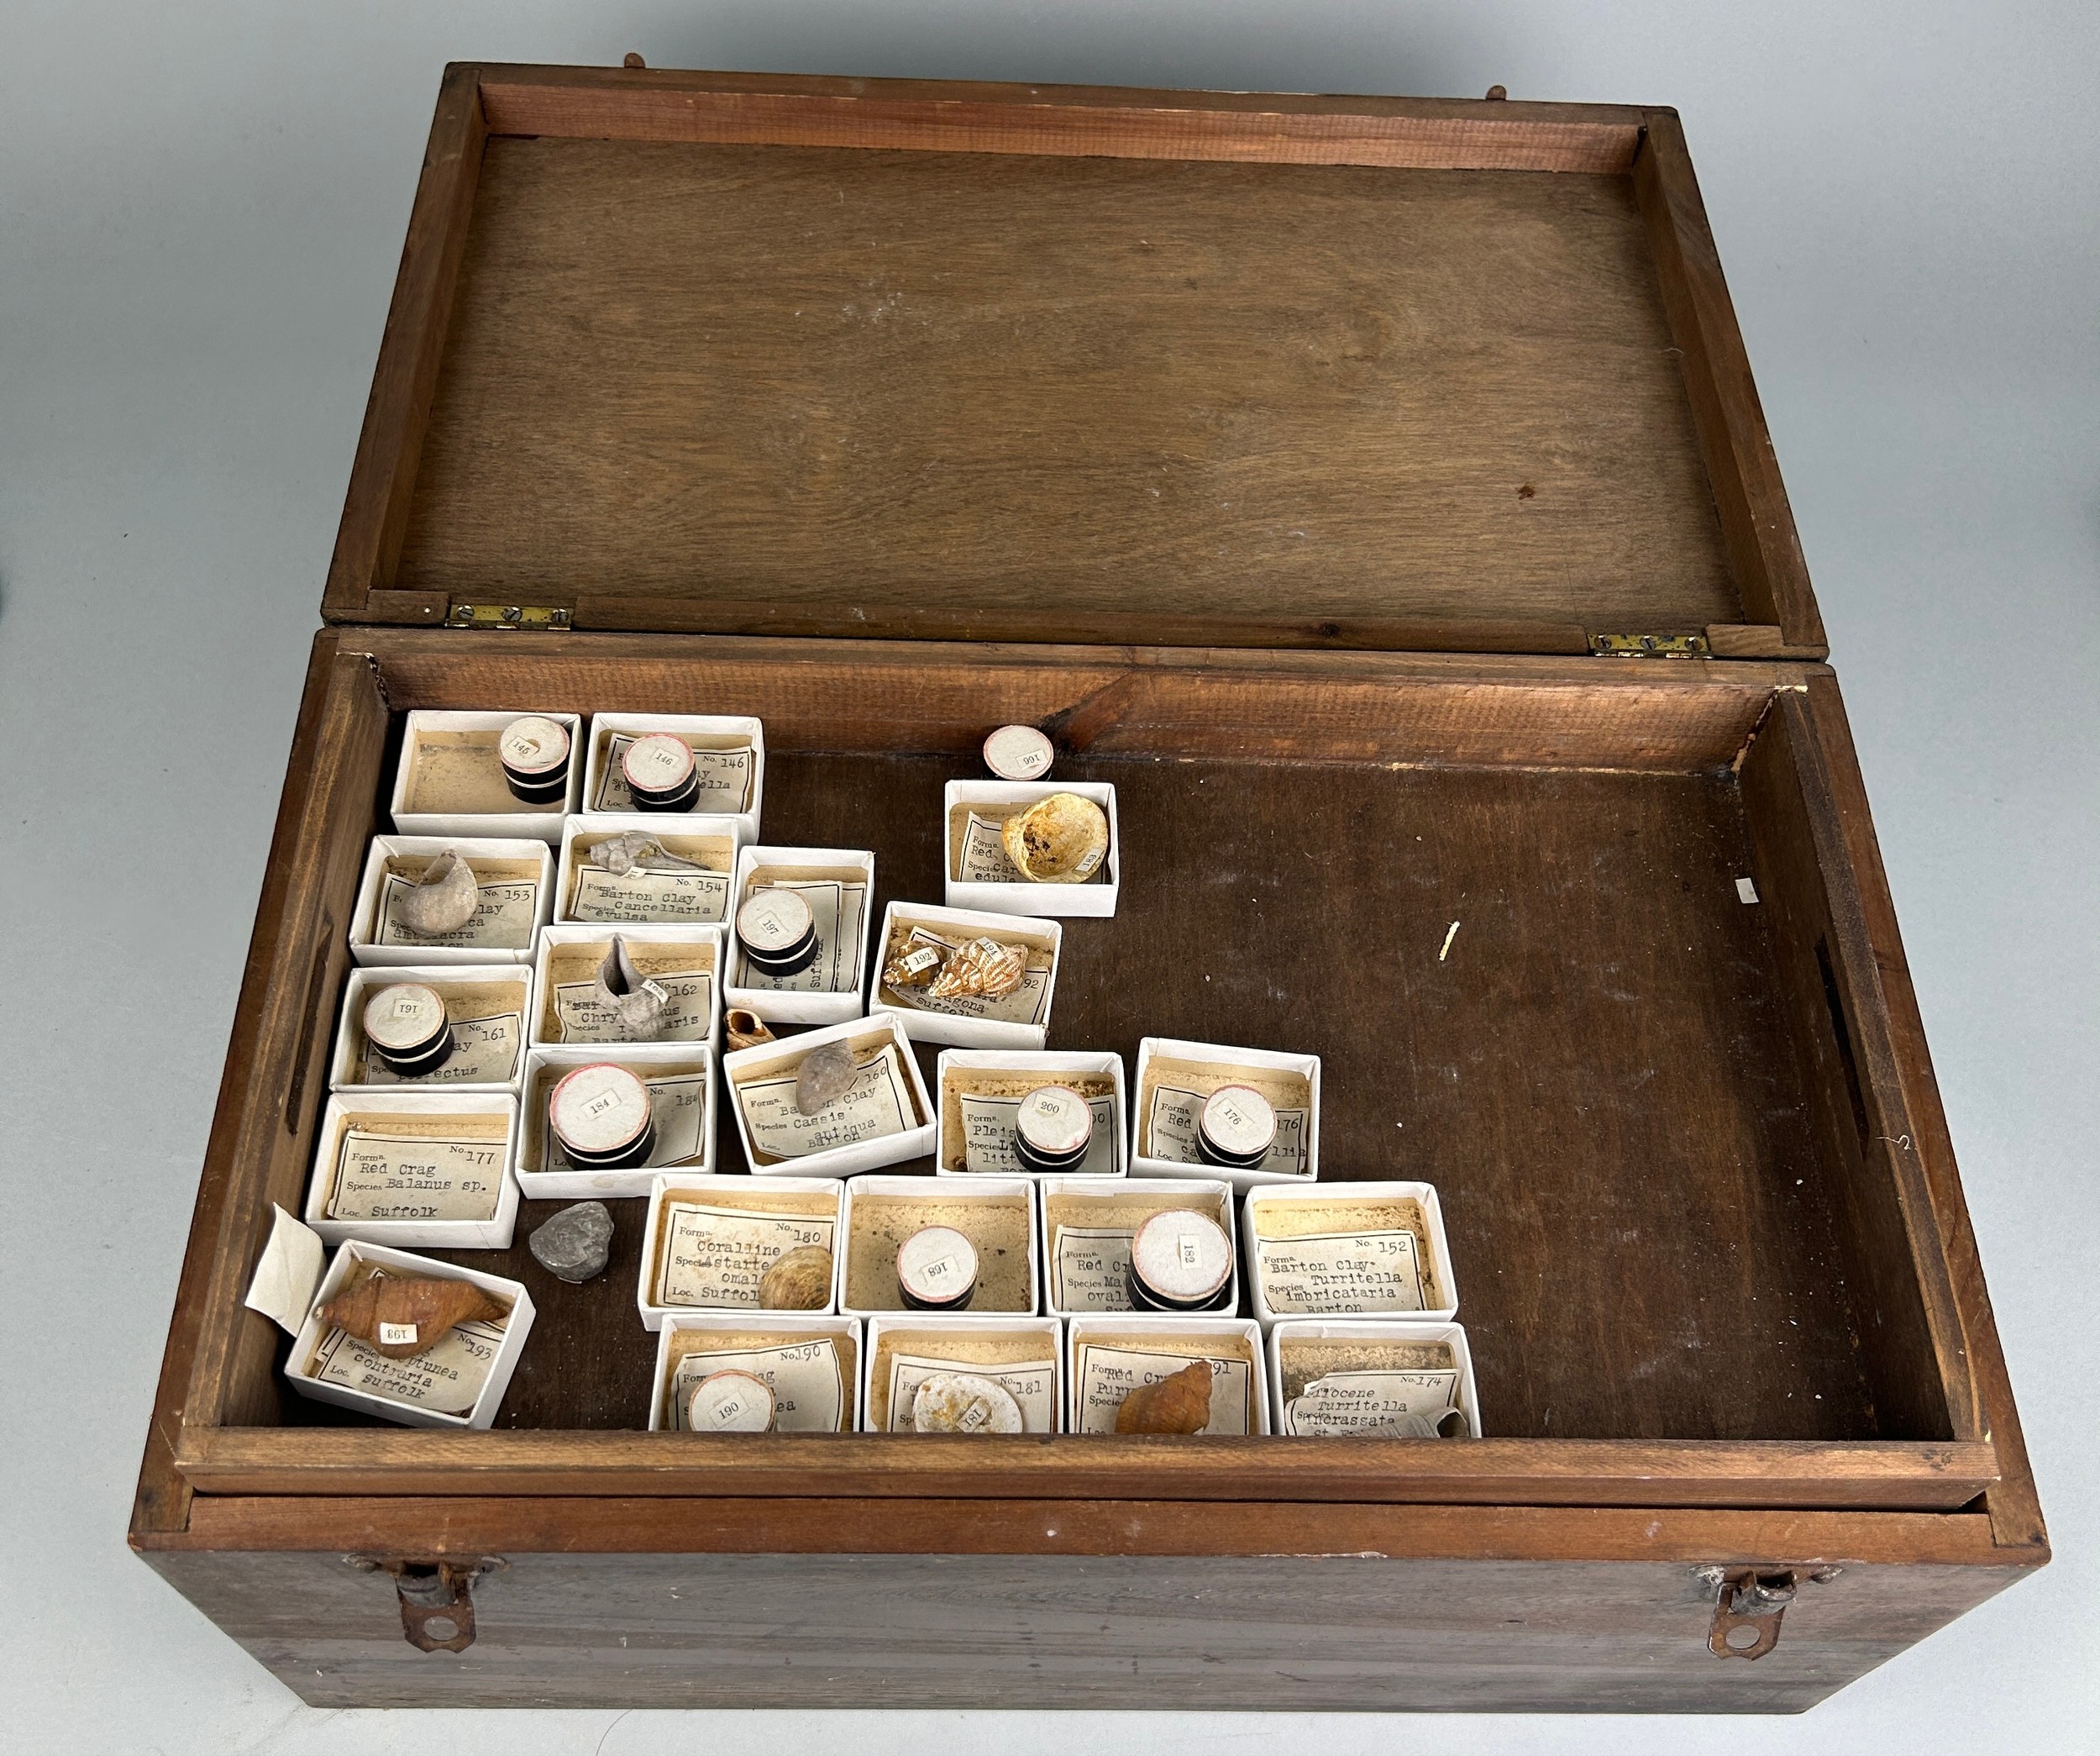 A GREGORY BOTTLEY CASED COLLECTION OF FOSSILS, Four wooden trays contained in a wooden box. - Image 12 of 12